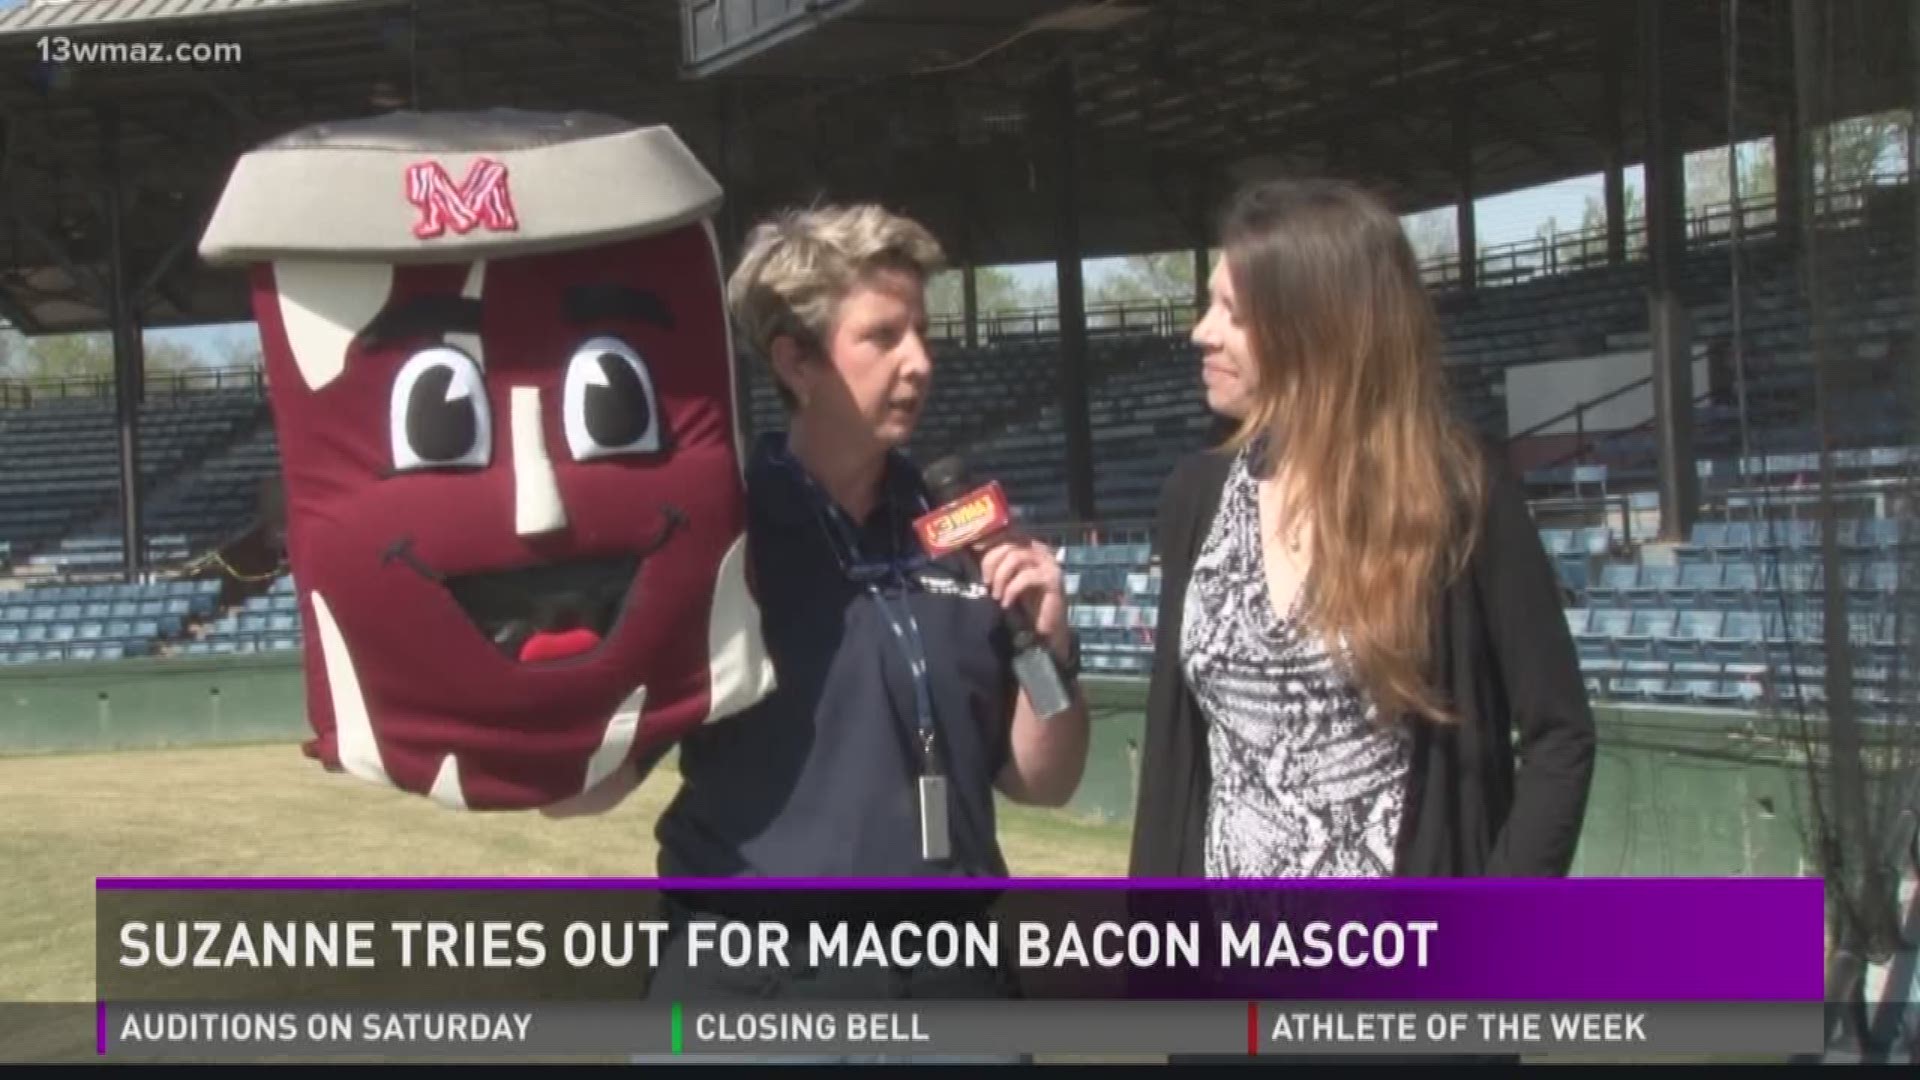 Suzanne tries out for Macon Bacon mascot